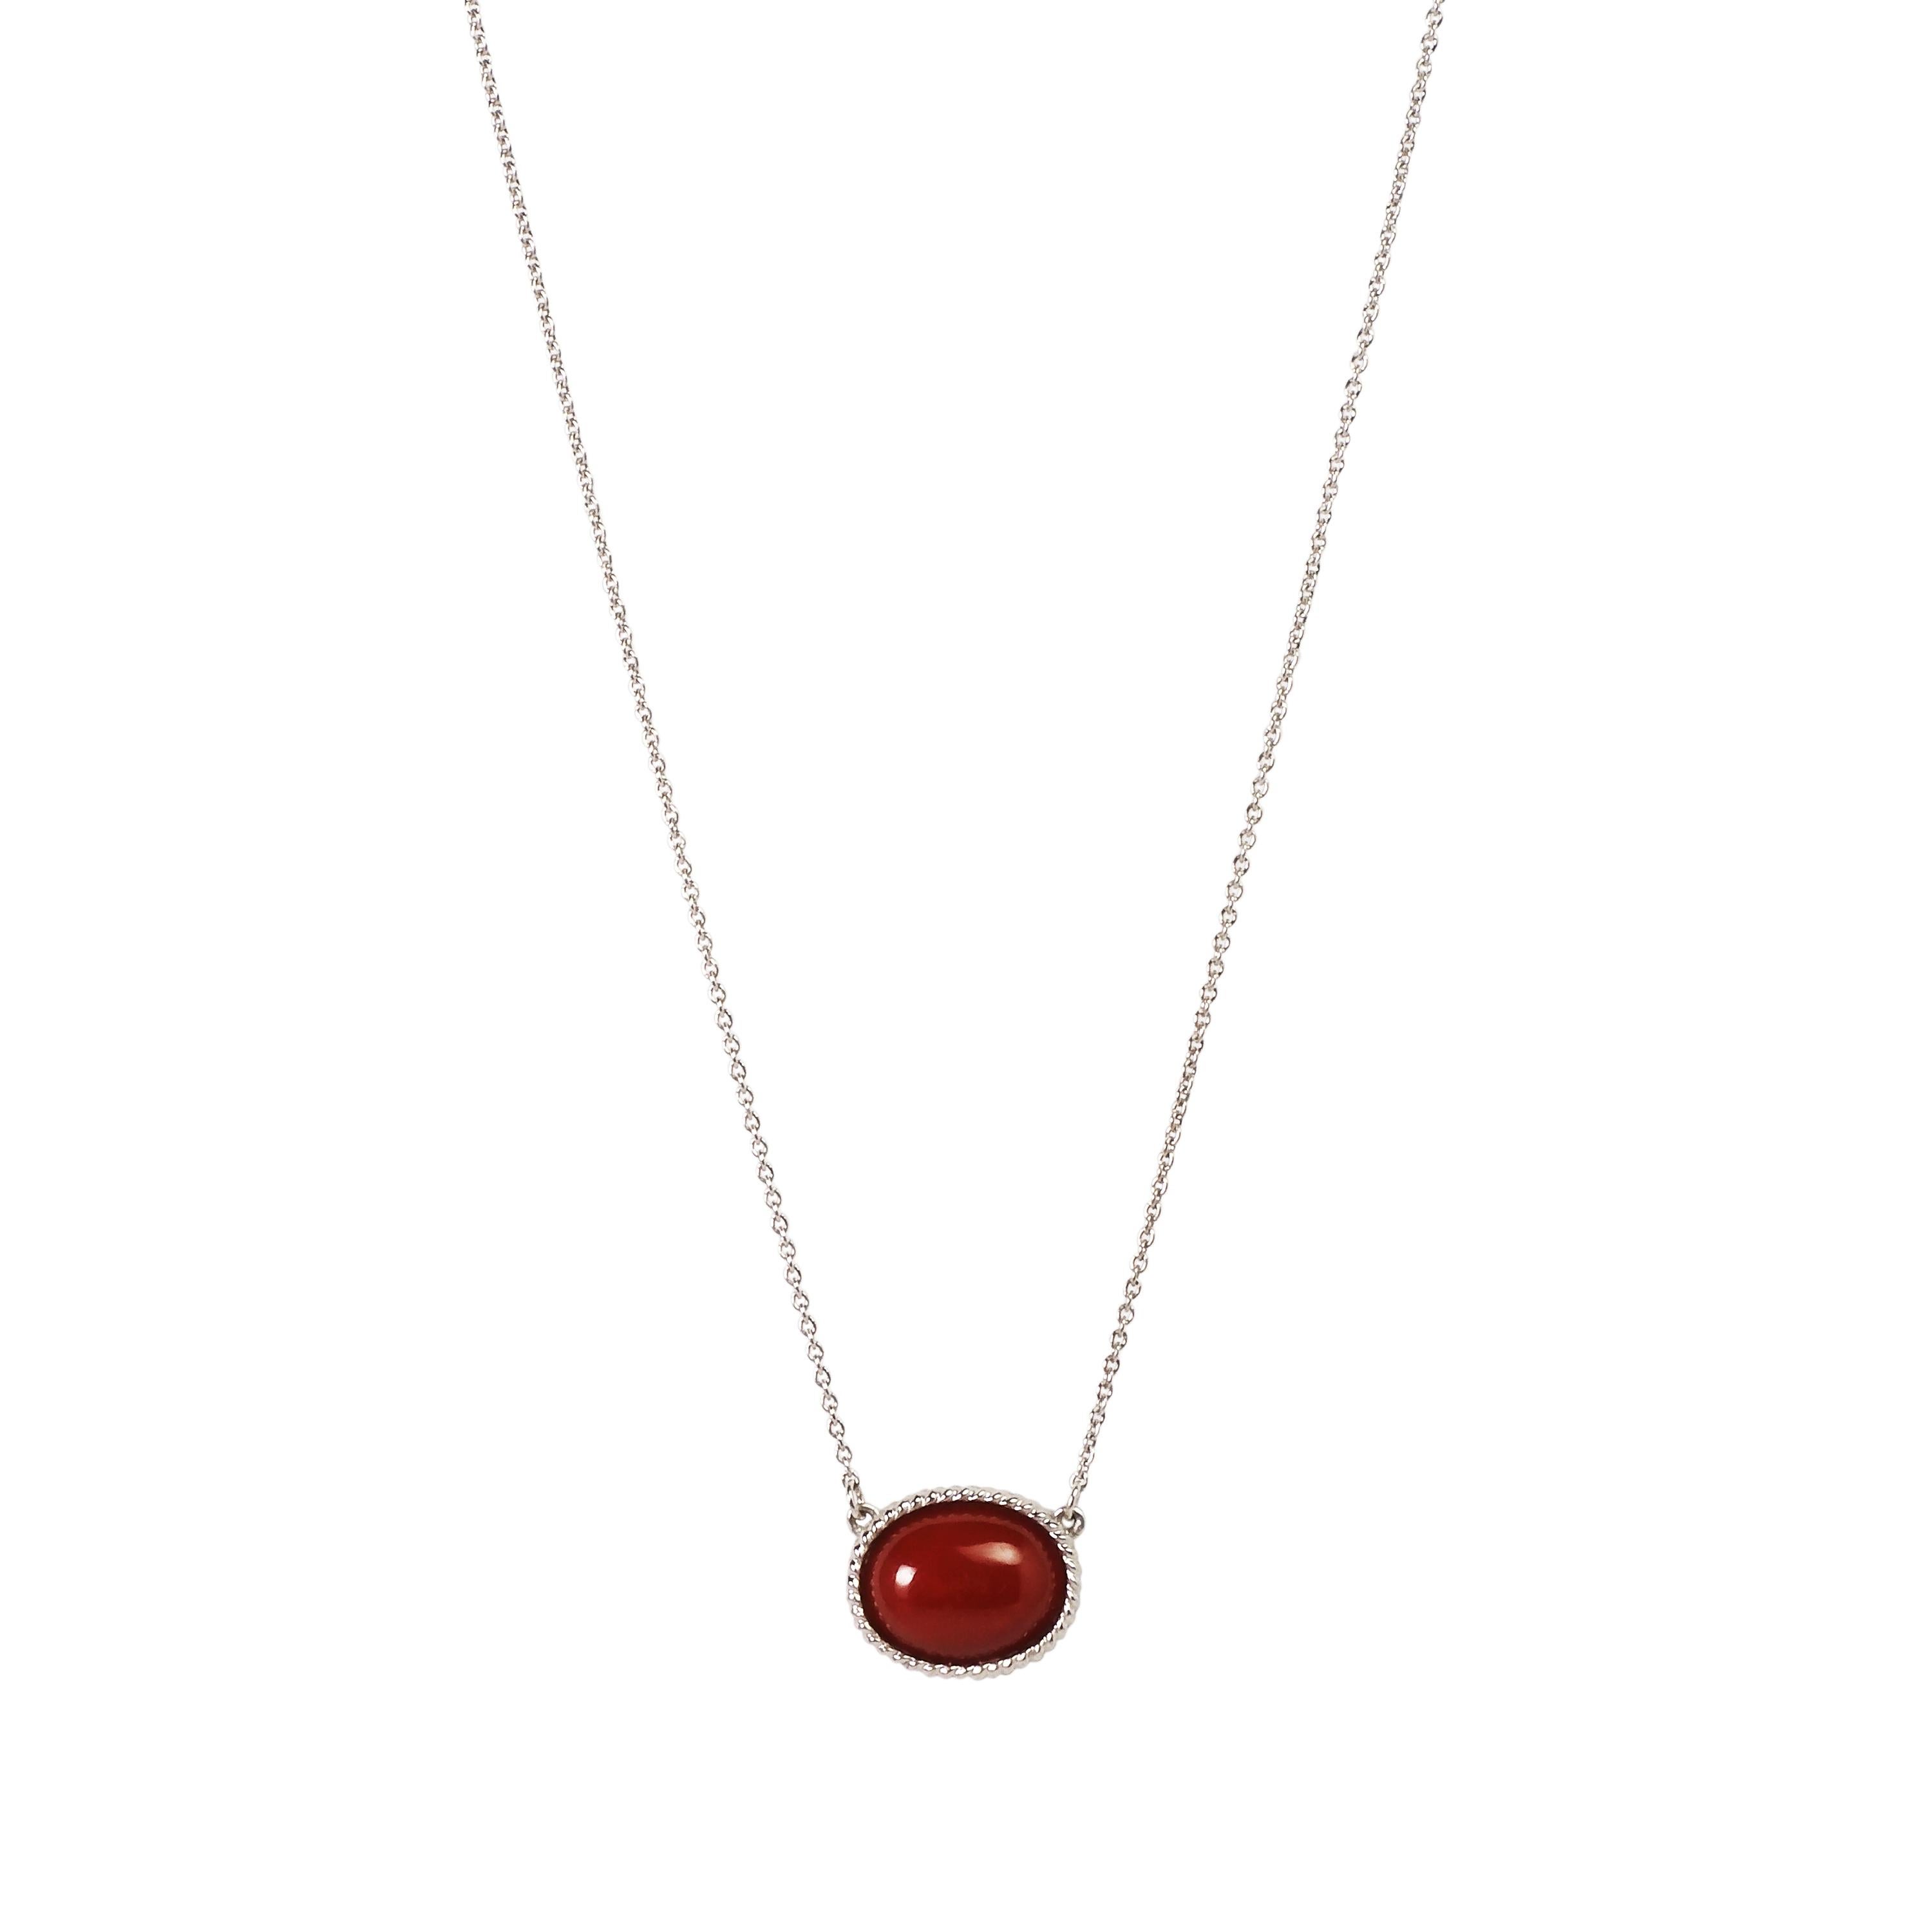 This 18 karat white gold Chiaka Sango(Oxblood Coral) pendant has fine stranded lines around the coral and delicate openwork pattern on the back of the bezel. It also has an ethnic atmosphere and matches the deep red Chiaka Sango (Oxblood